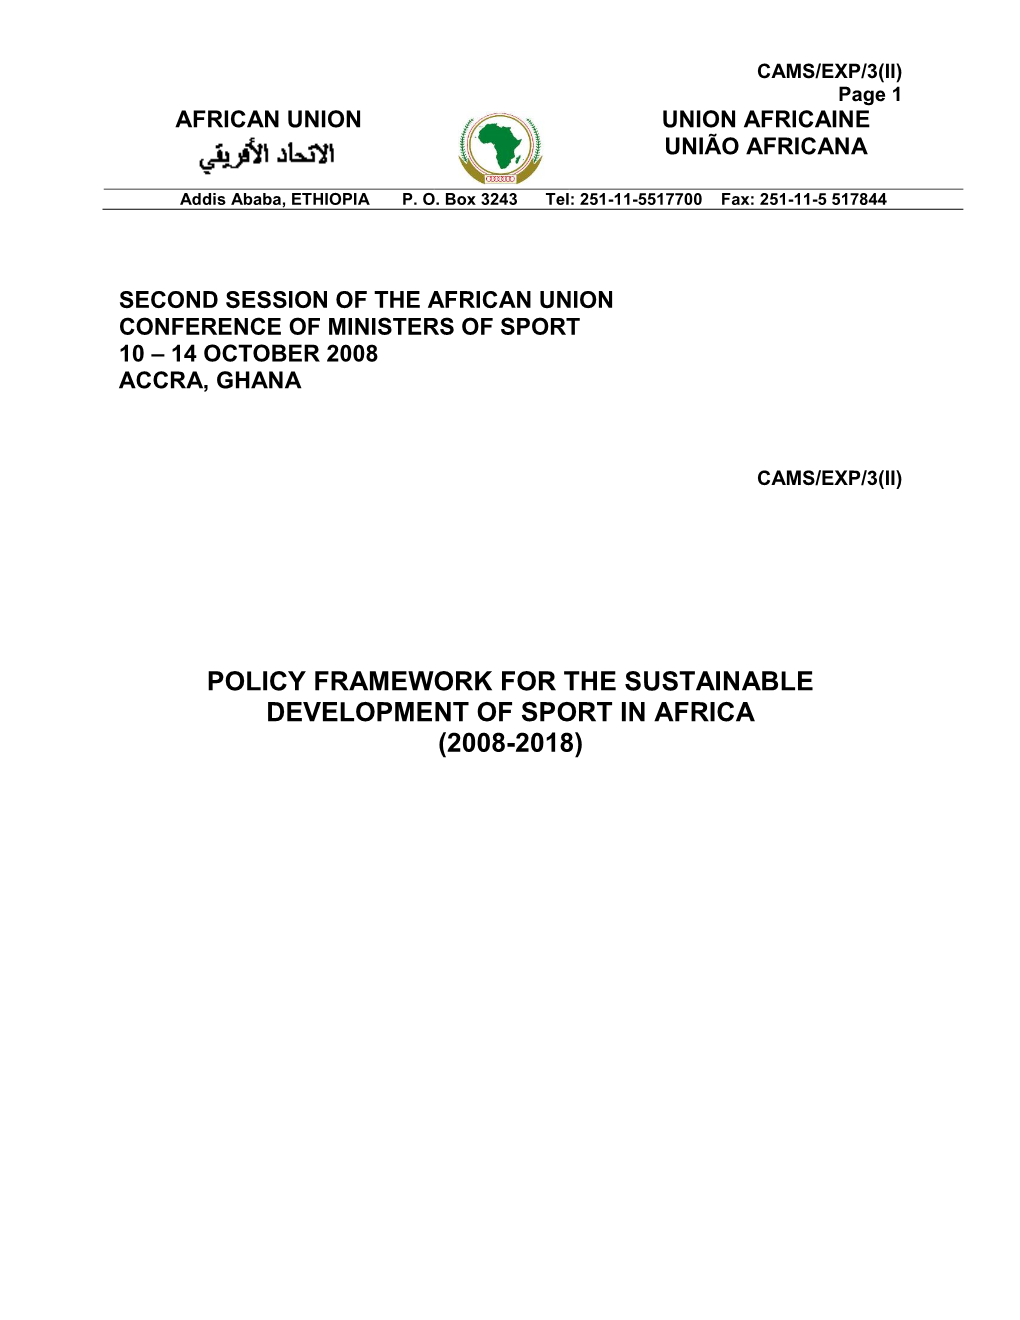 Draft Framework for Sport Policy in Africa